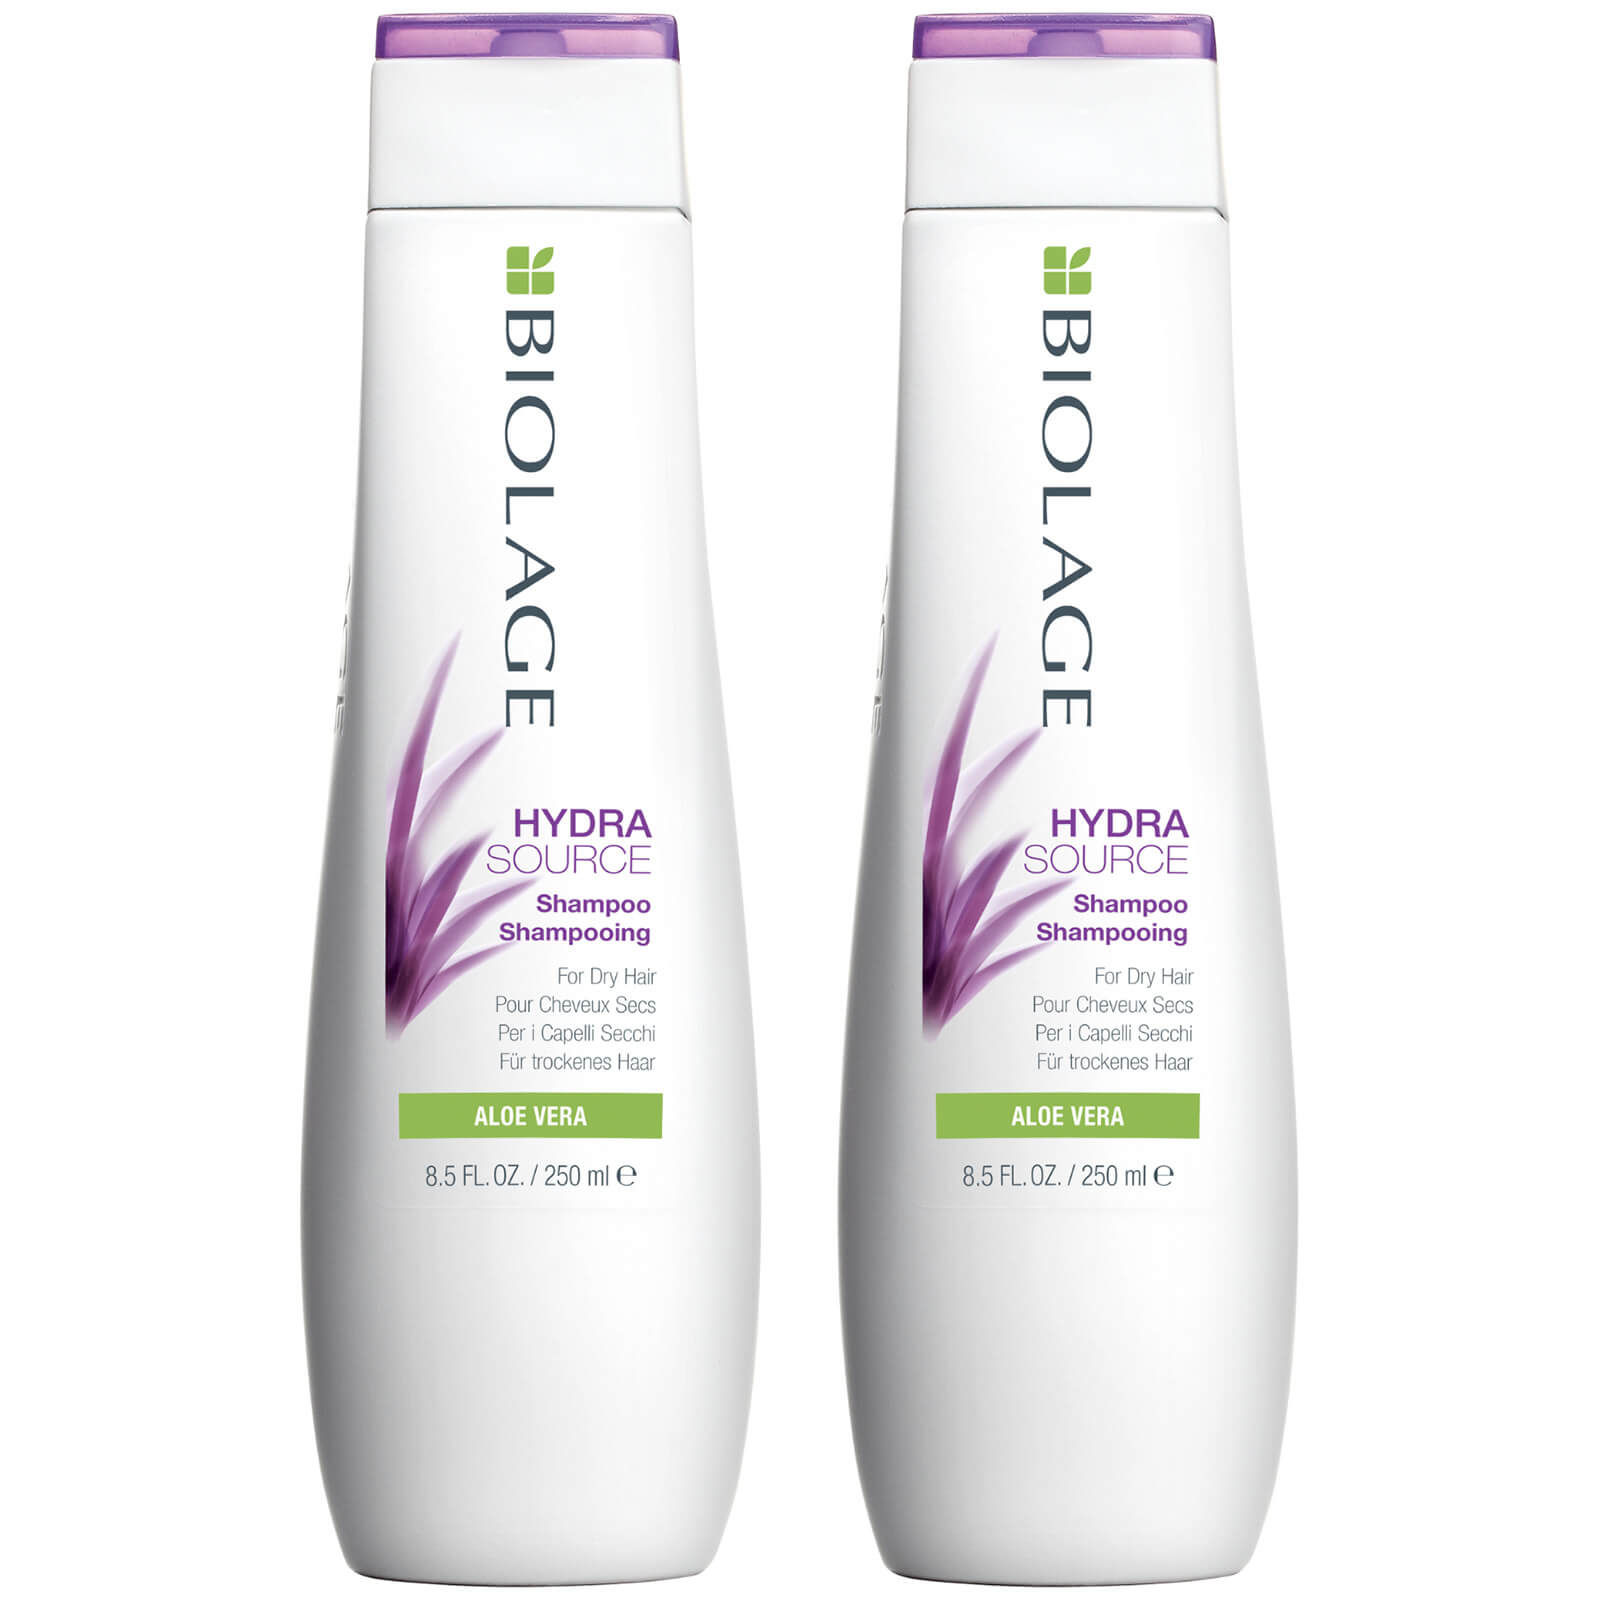 Image of Biolage Hydrasource Shampoo 250ml Hydrating Duo for Dry Hair